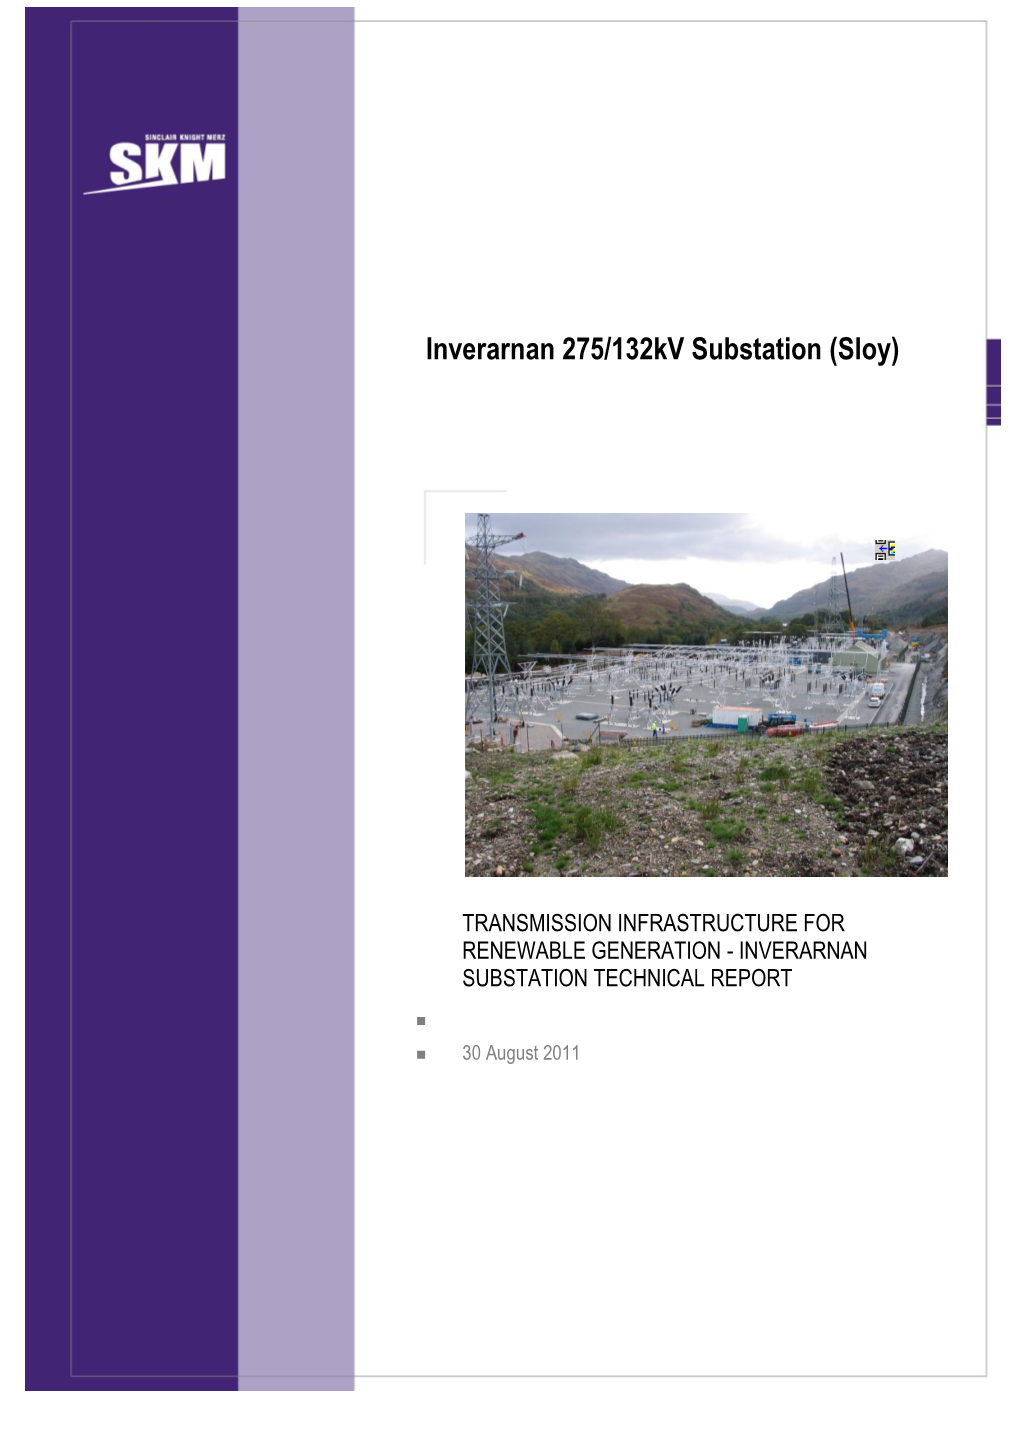 Sloy Post Construction Report and Completion Certificate.Docx PAGE I Transmission Infrastructure for Renewable Generation - Inverarnan Substation Technical Report